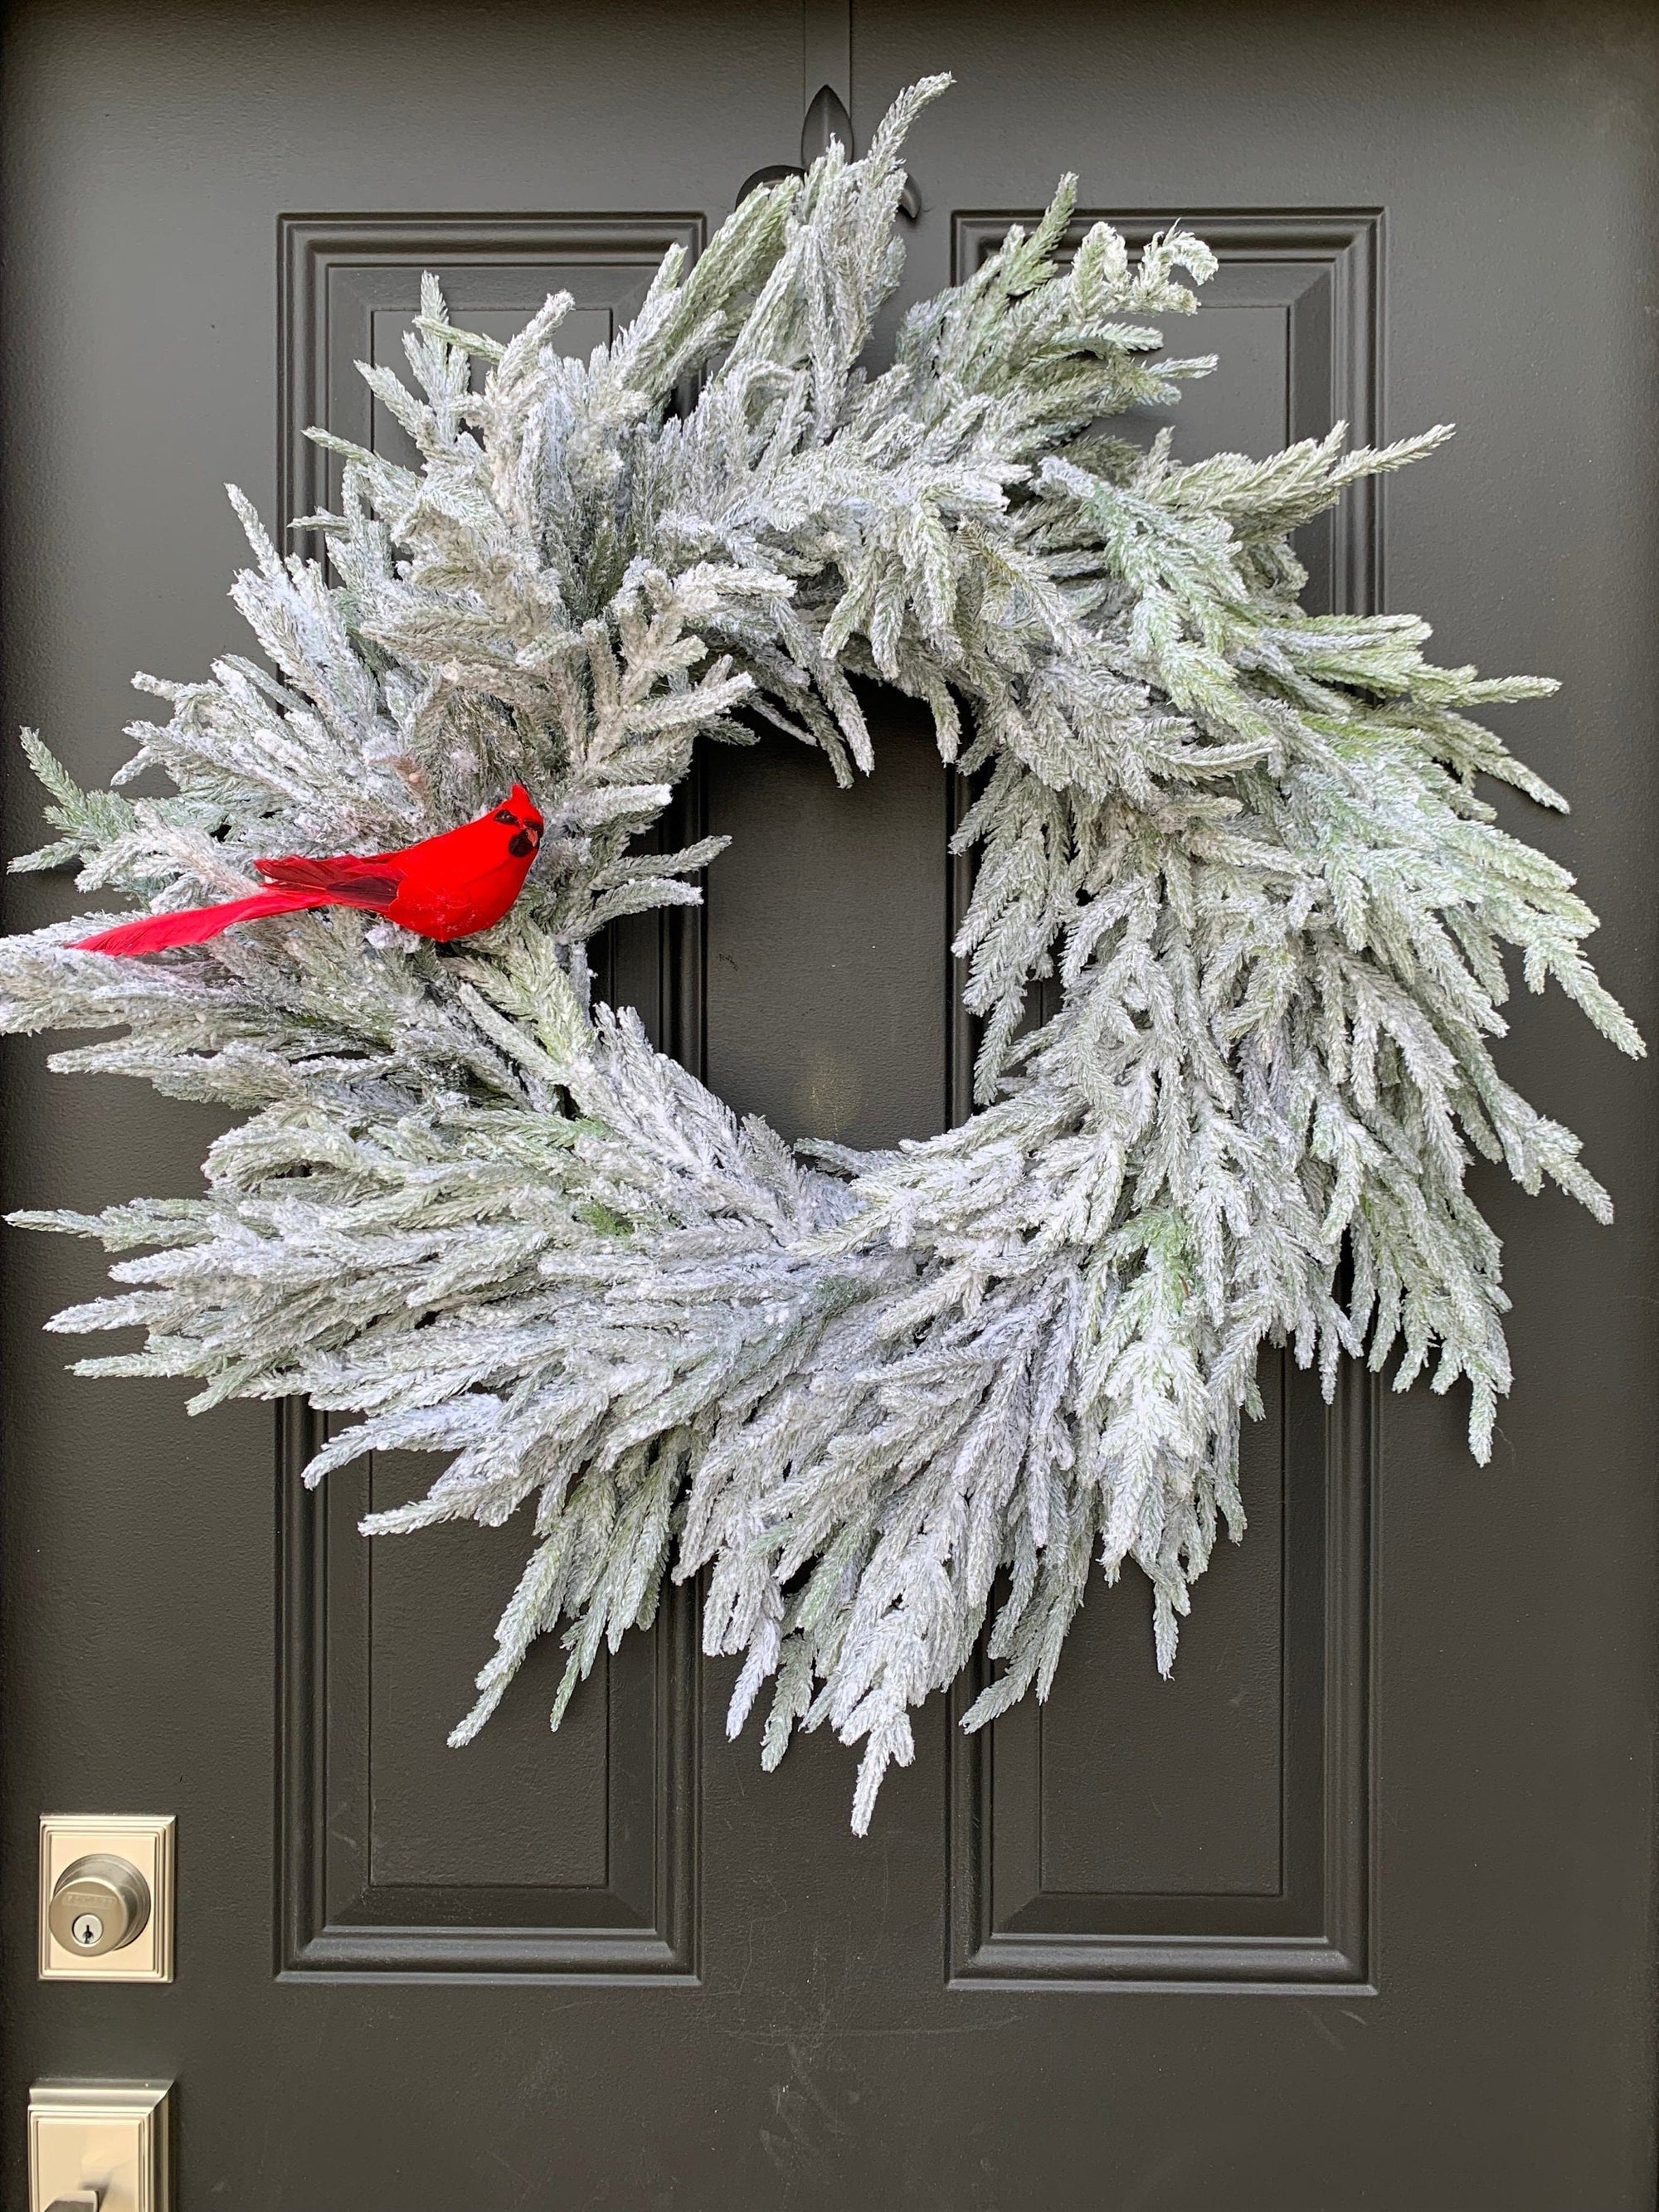 I'll Be Home for Christmas, Flocked Christmas Wreath with Cardinal - Ready to Ship